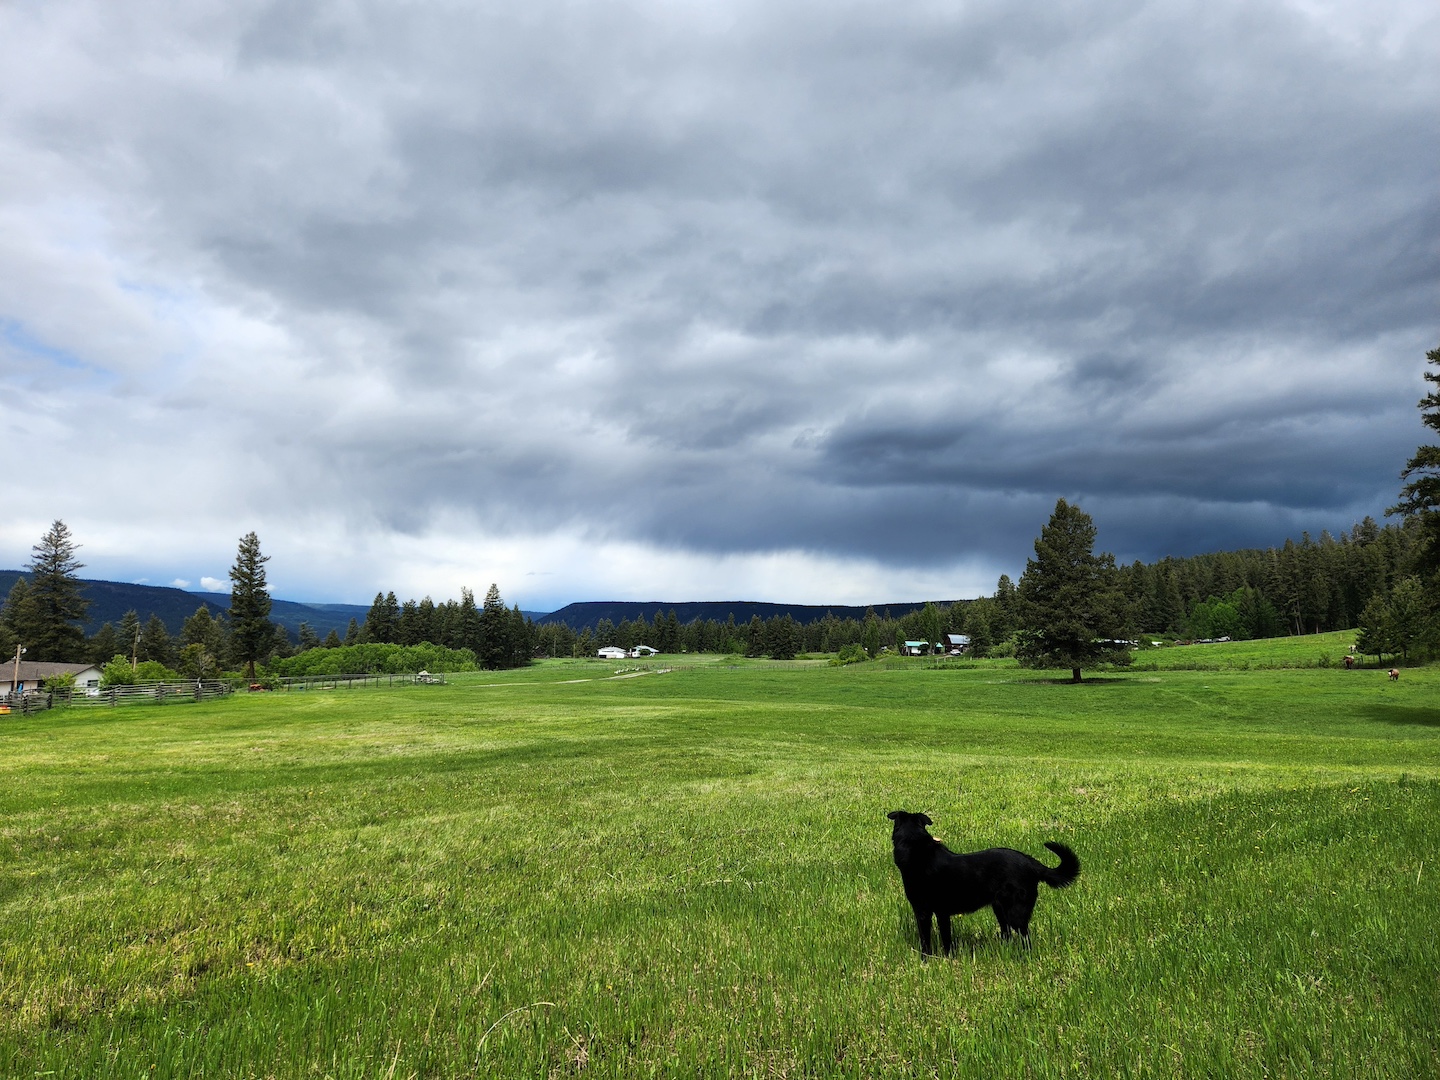 photo of a black dog in a large green farm field, under a stormy sky of dark blue and grey